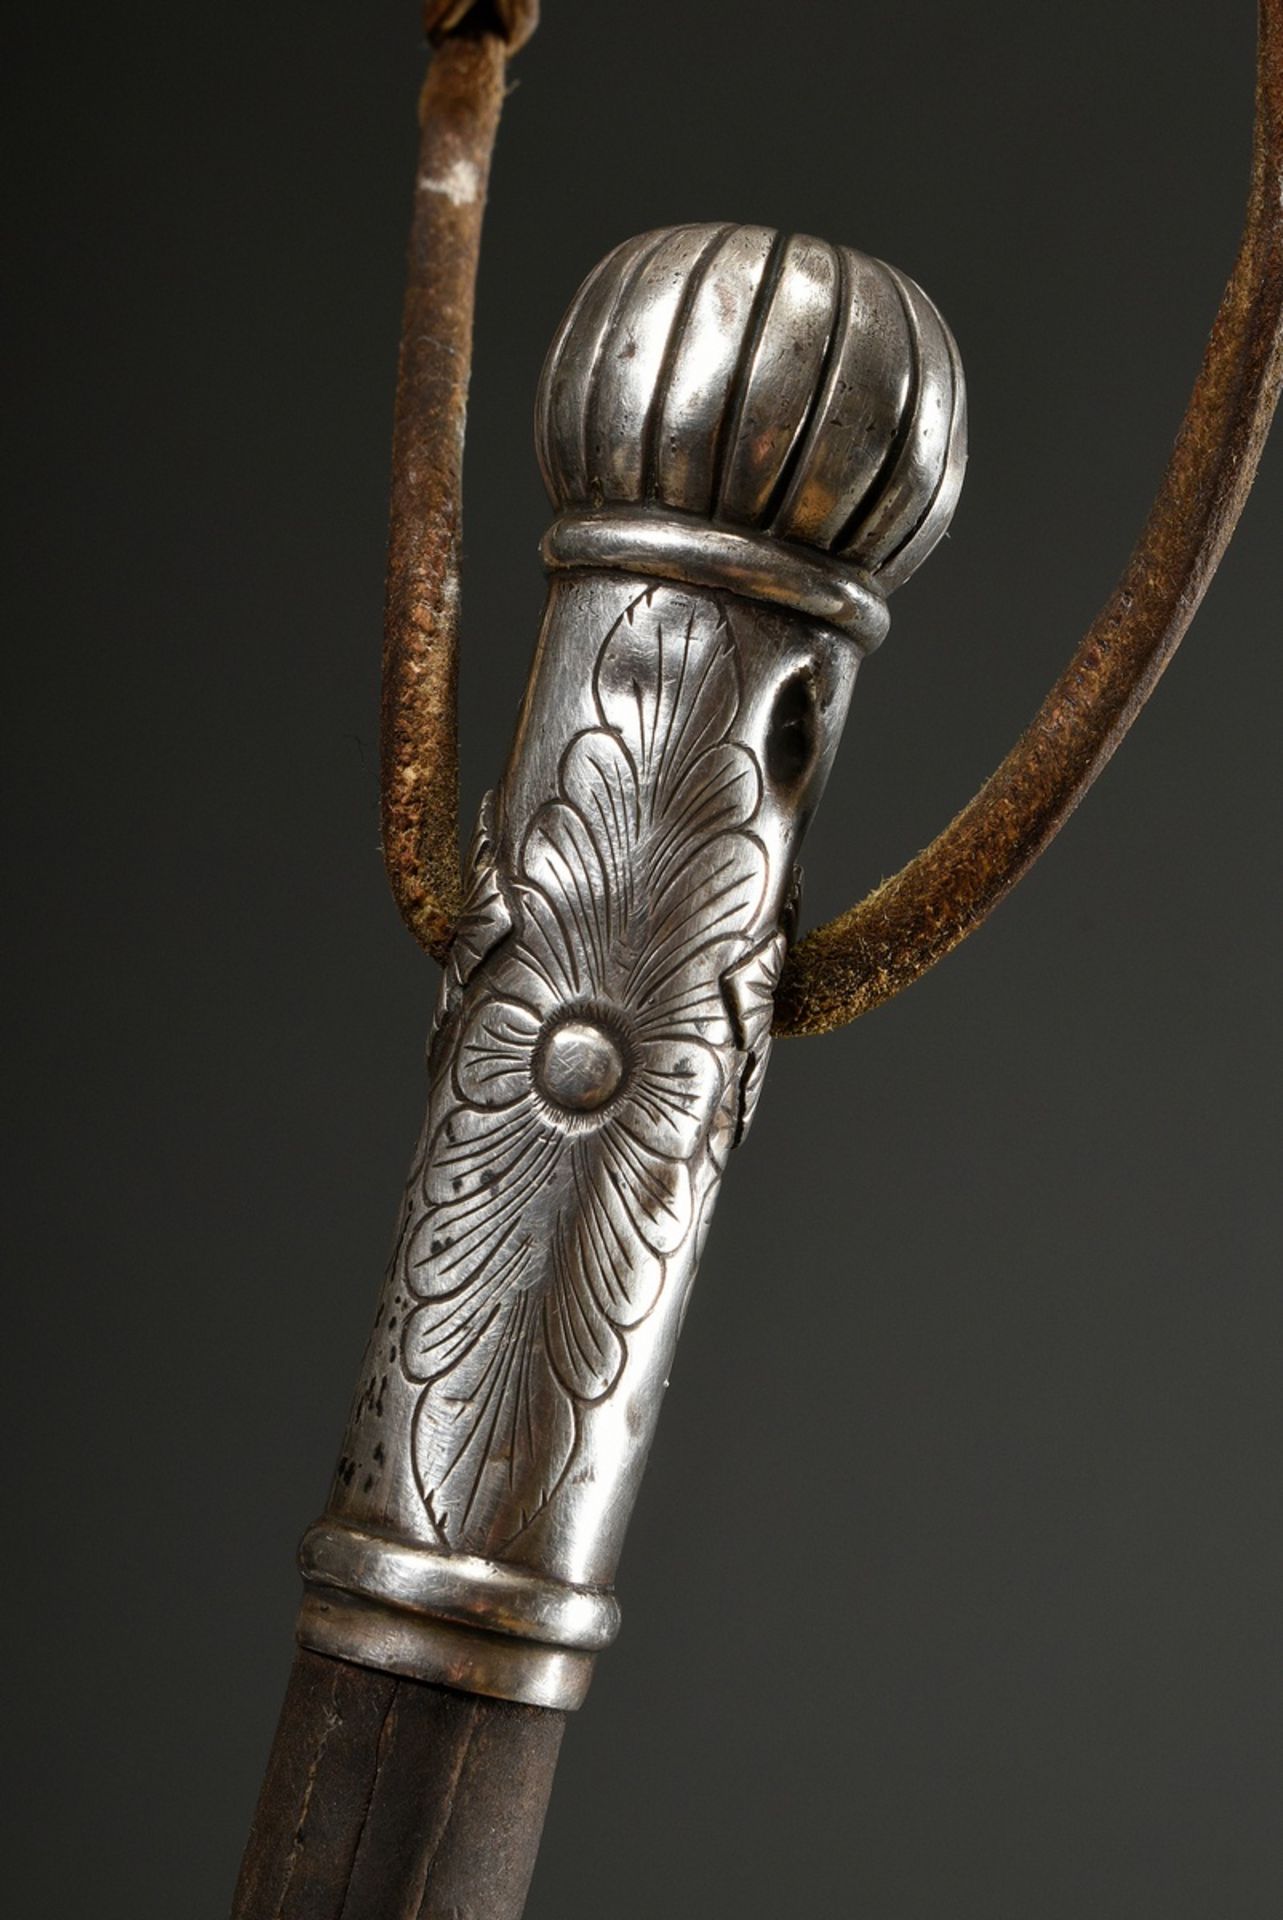 South American gaucho whip so-called Rebenque, leather with florally embossed silver cuffs and hand - Image 3 of 5